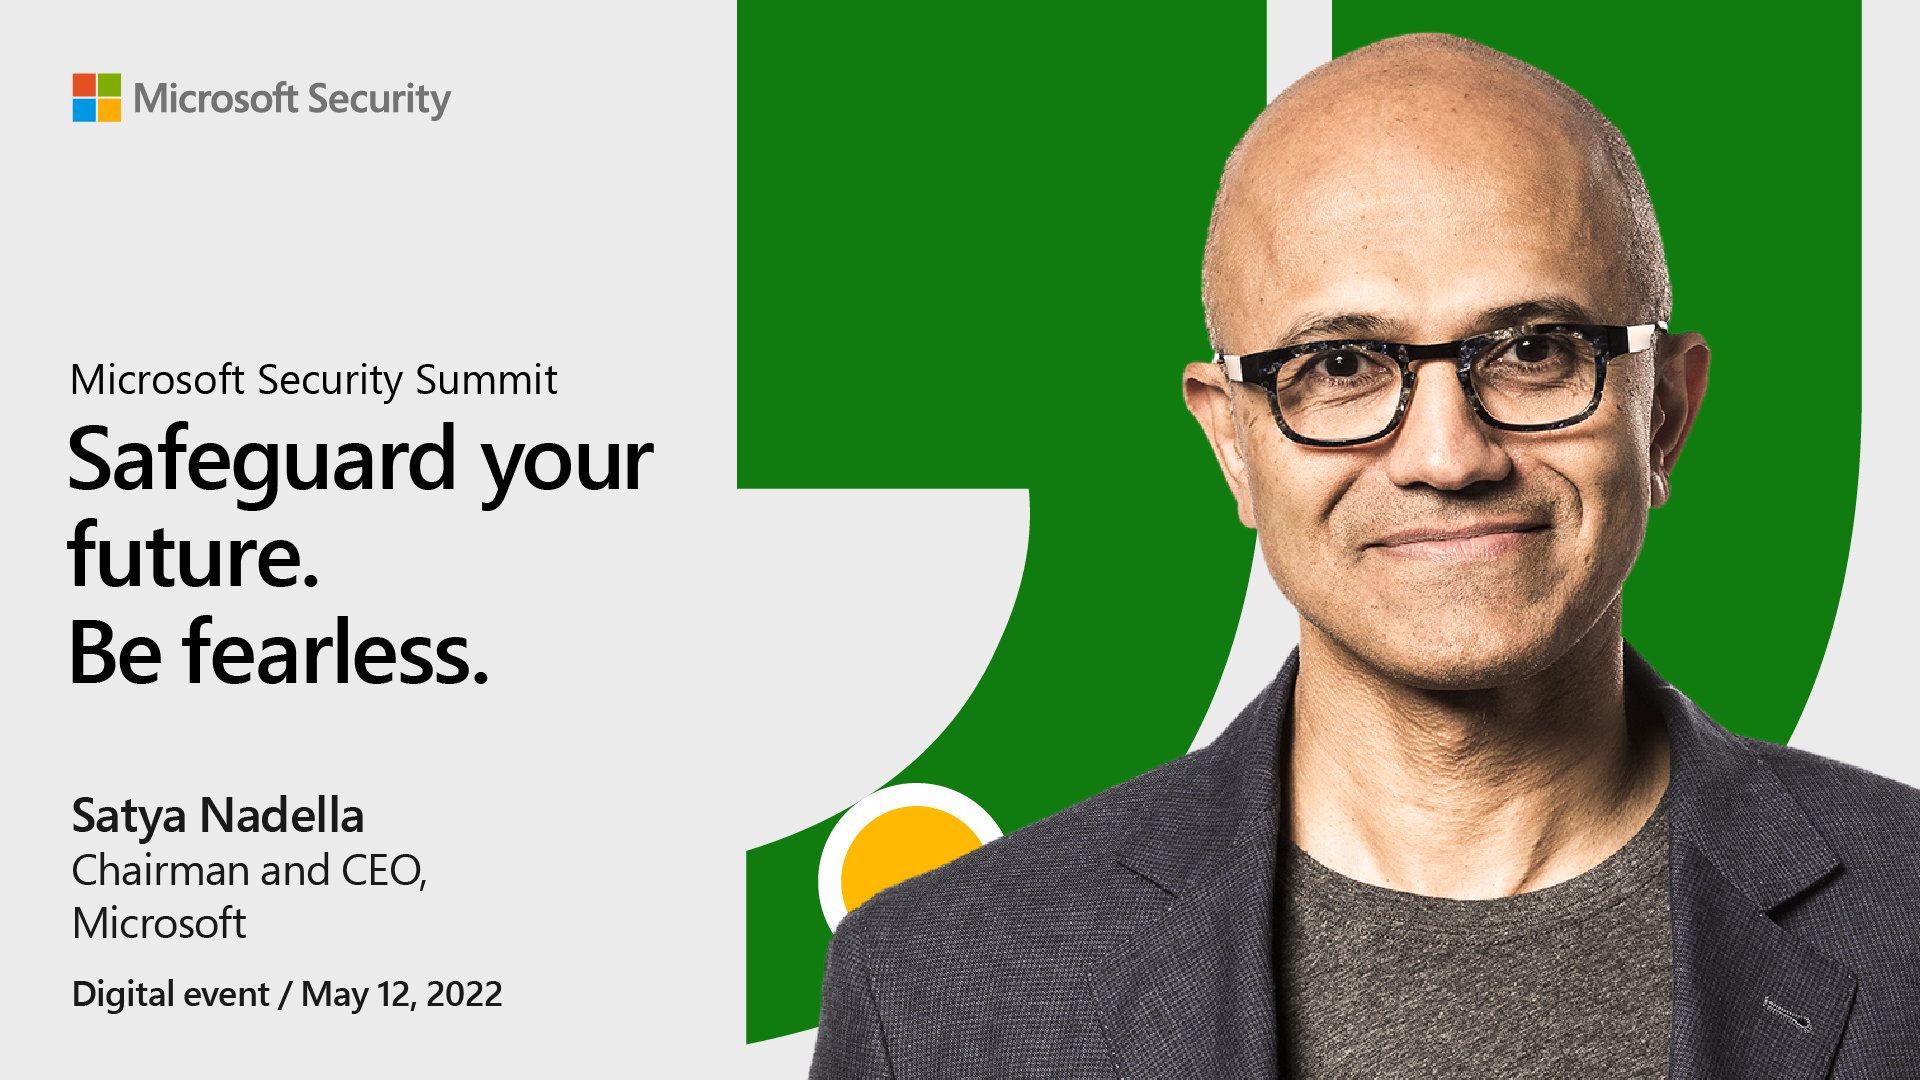 Microsoft Security on Twitter "Join satyanadella at the Microsoft